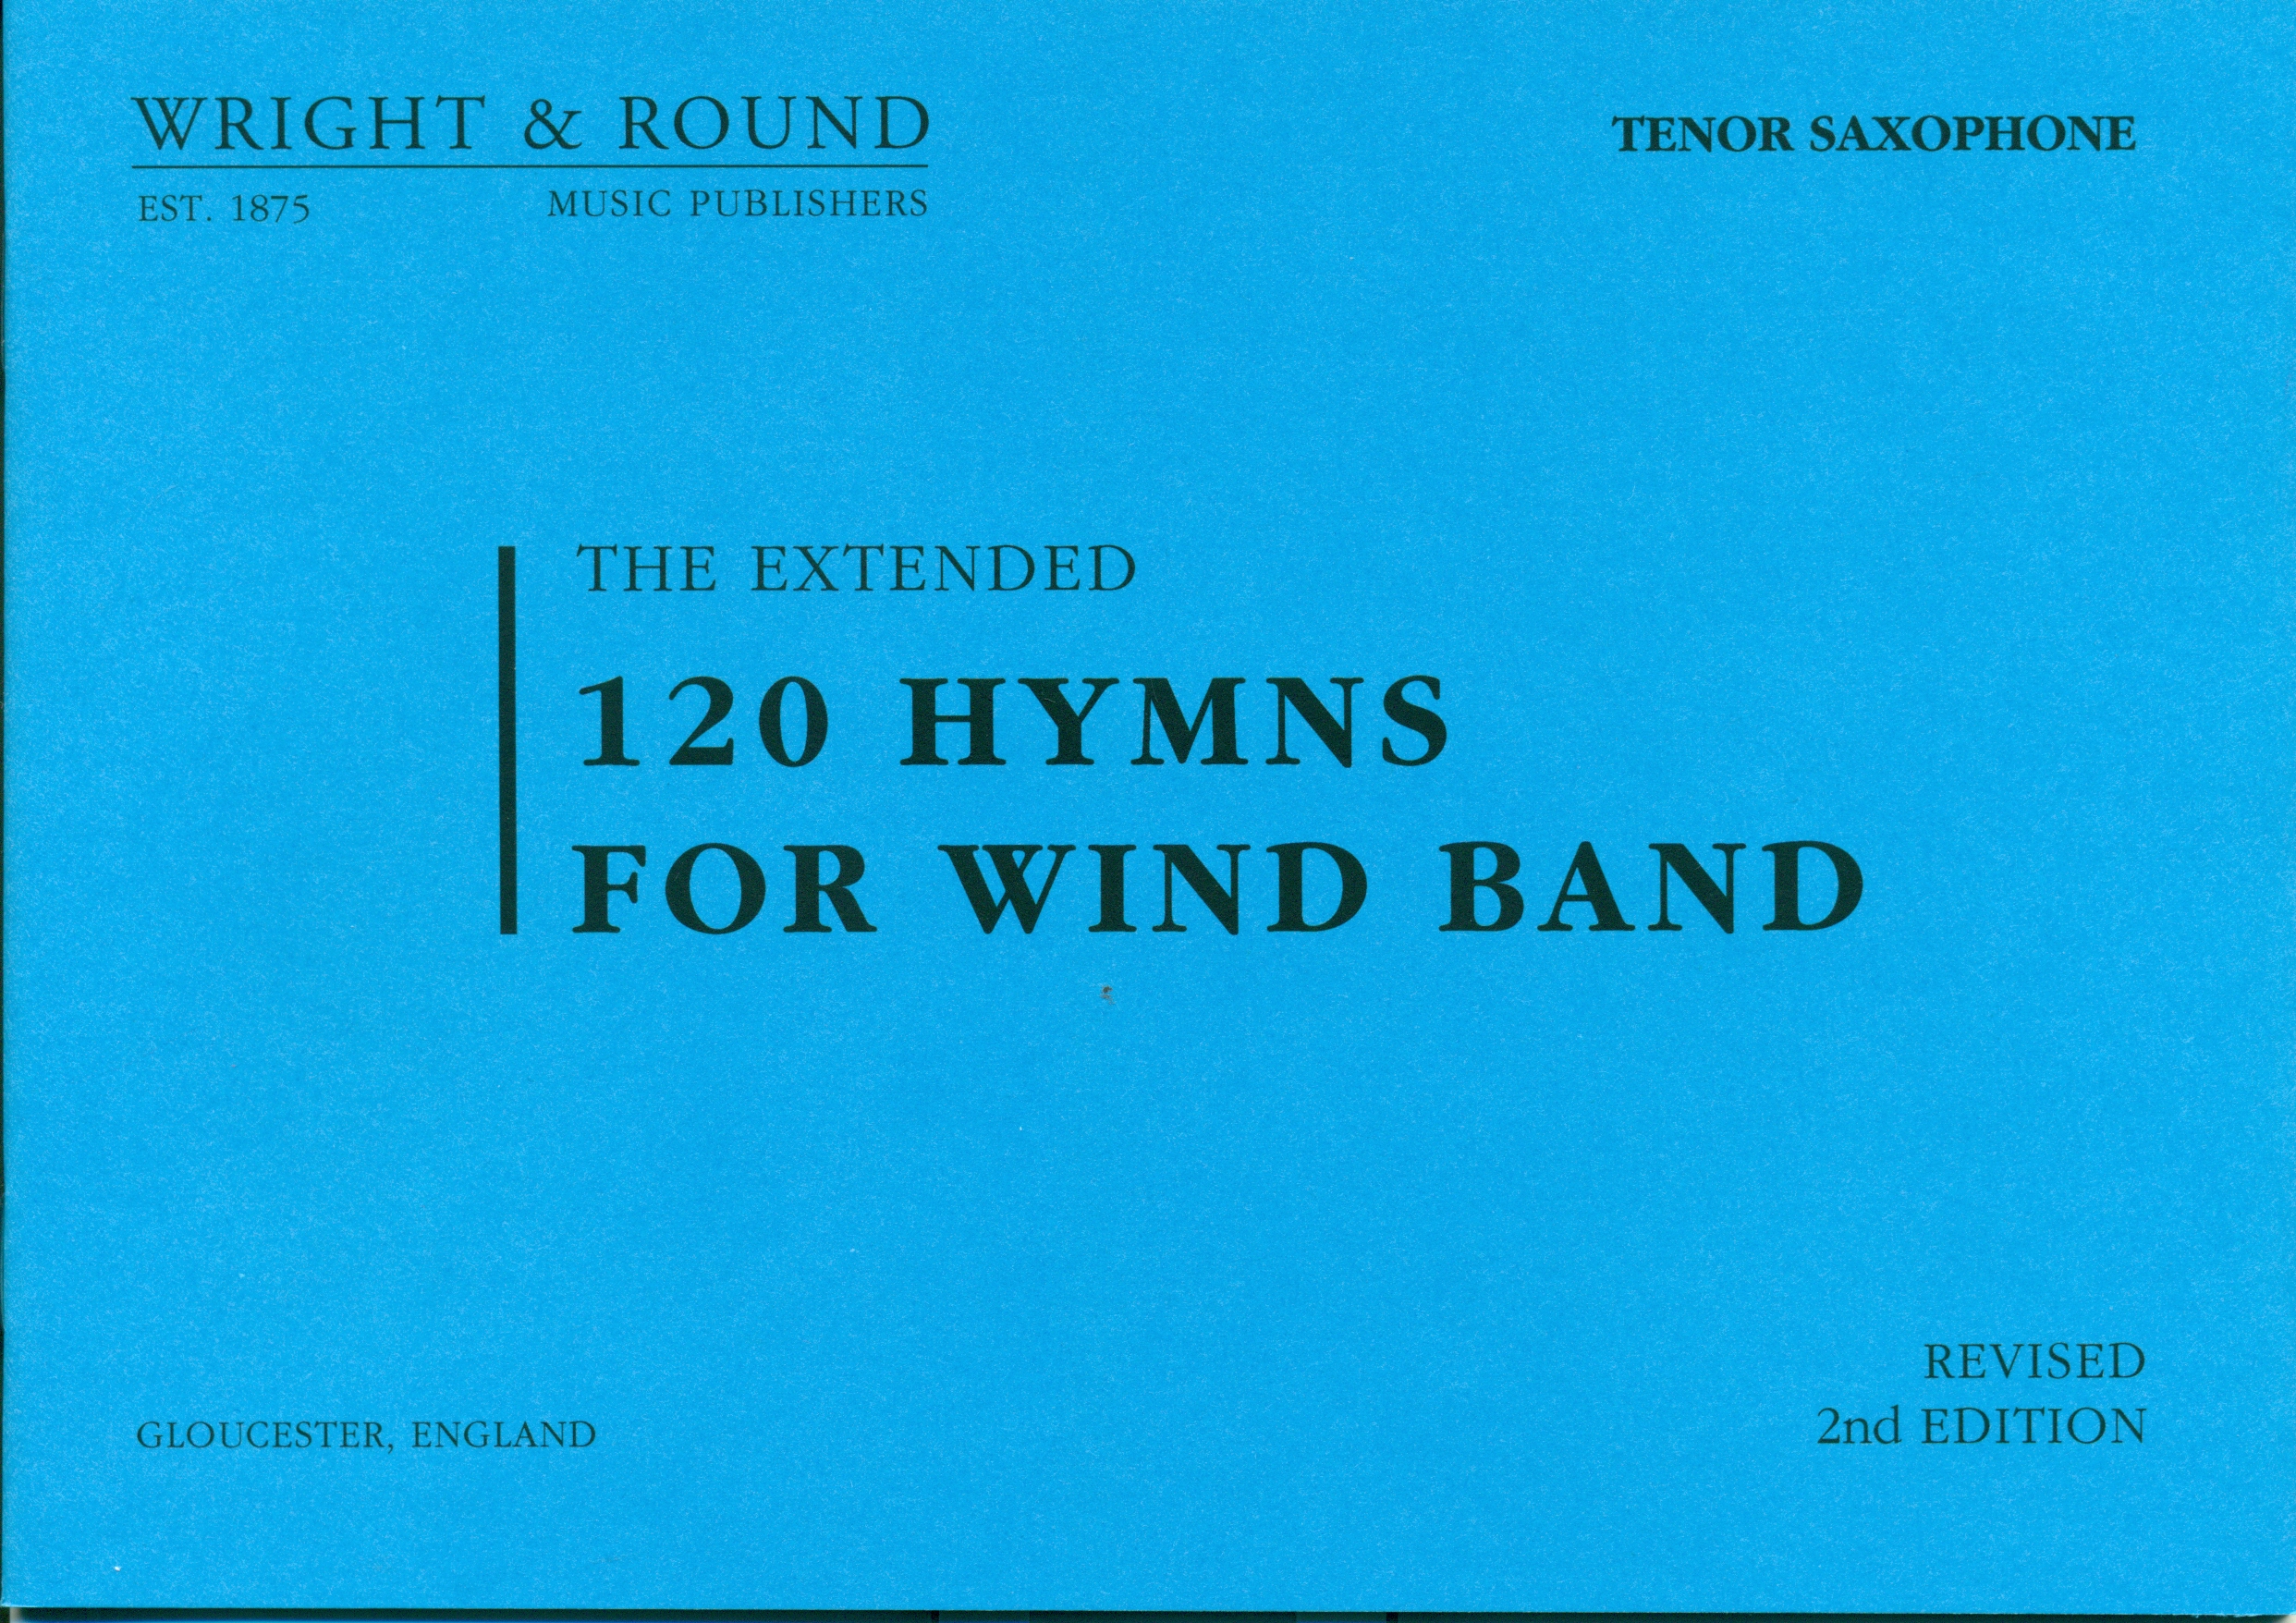 The Extended 120 Hymns for Wind Band – Tenor Sax